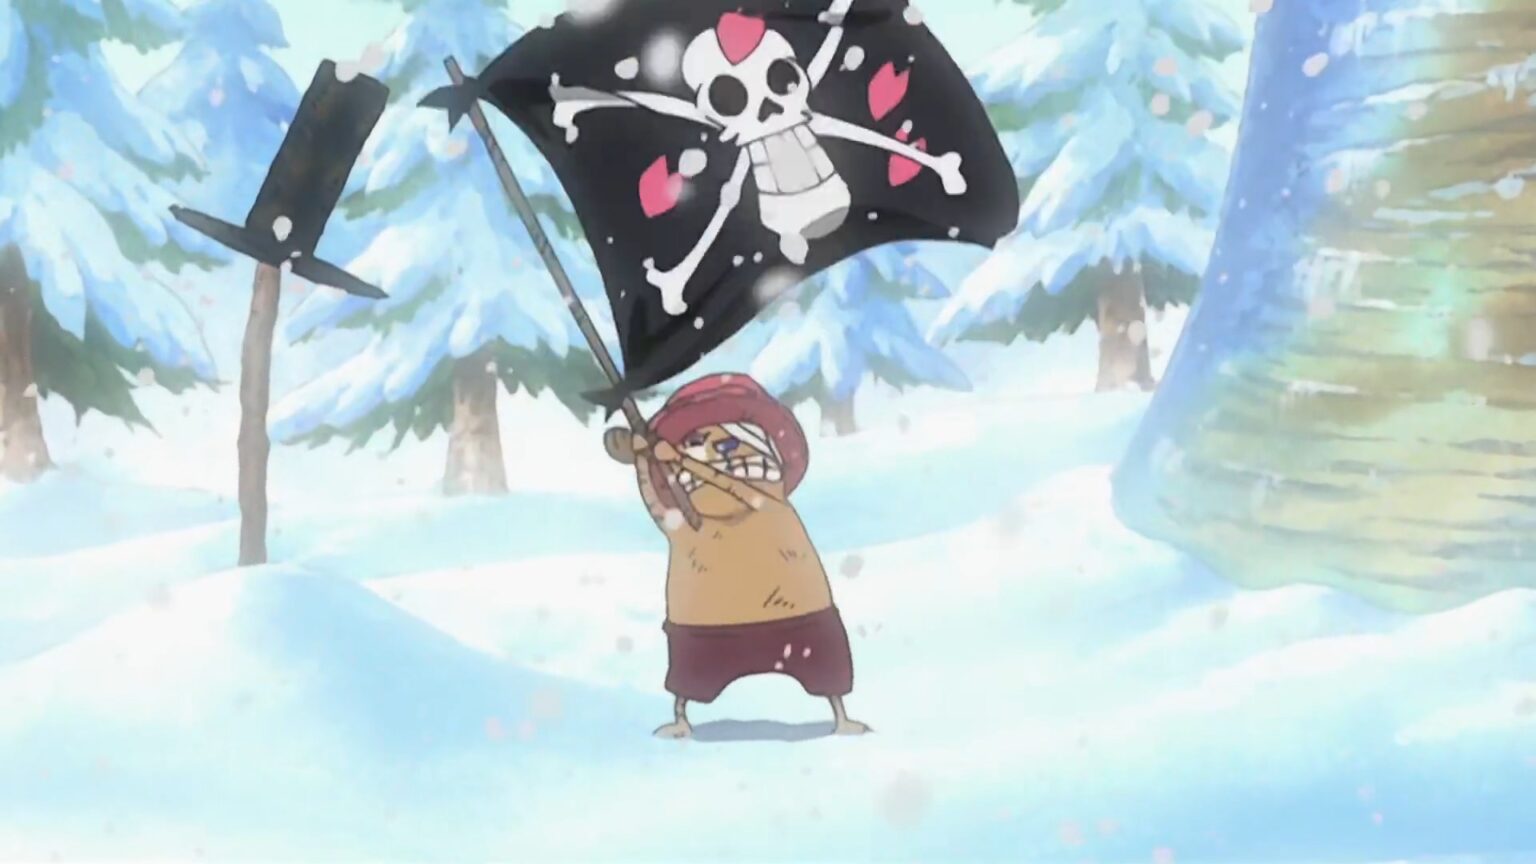 One Piece EP 86. Chopper Joins the Straw Hats as their new doctor!